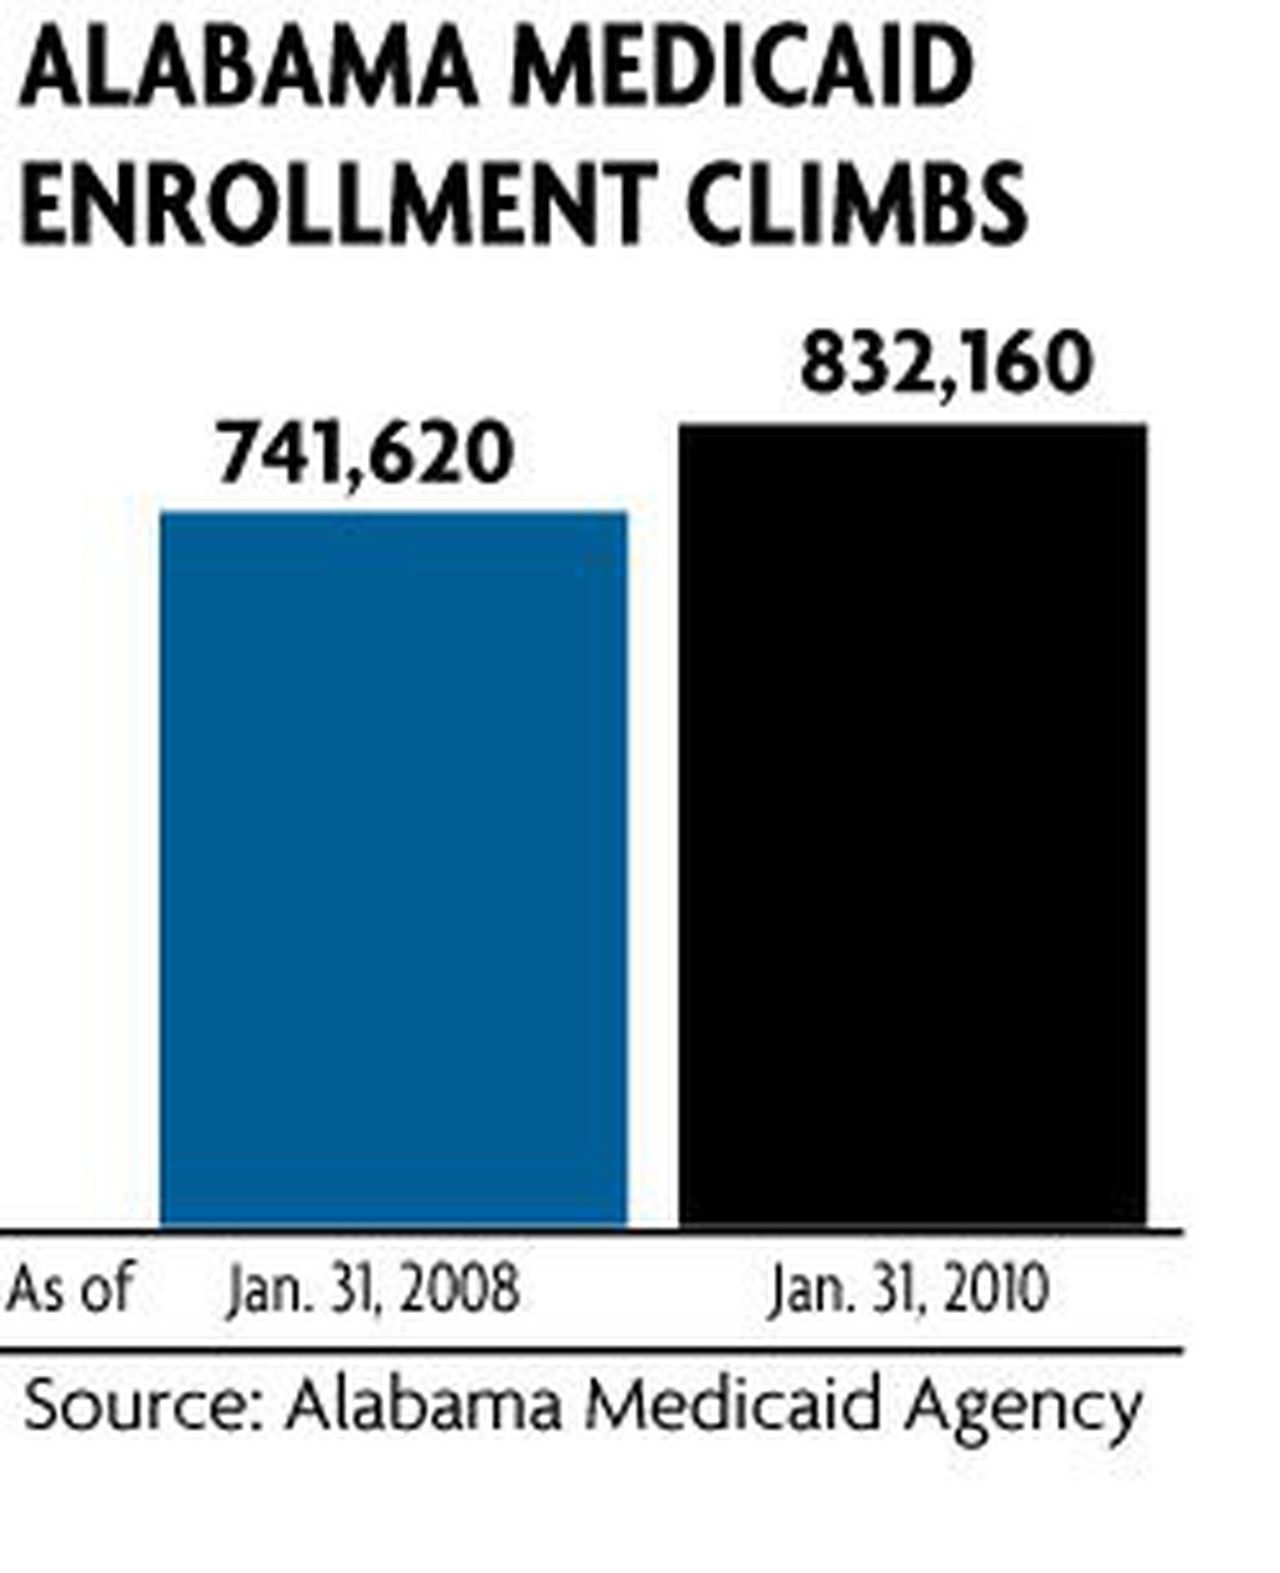 Alabama Medicaid rolls stabilize, but at high number